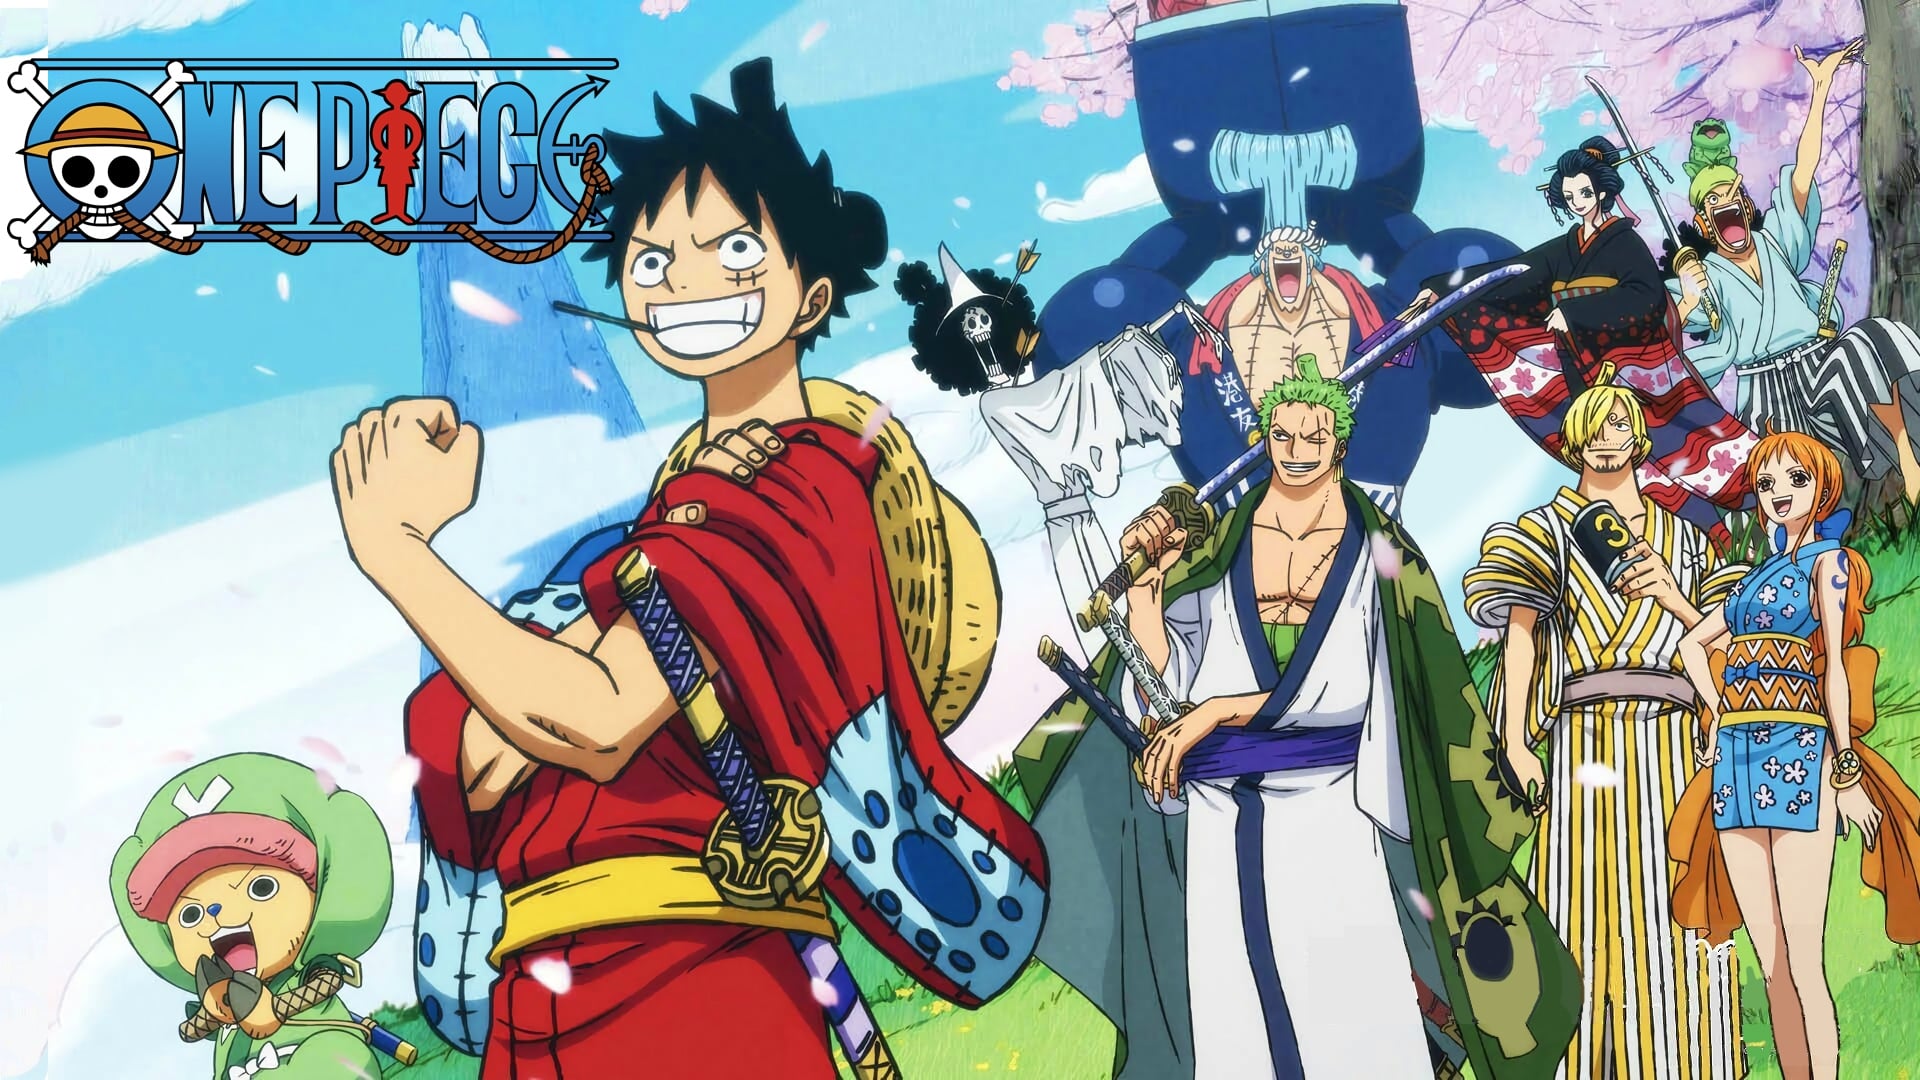 About "One Piece"